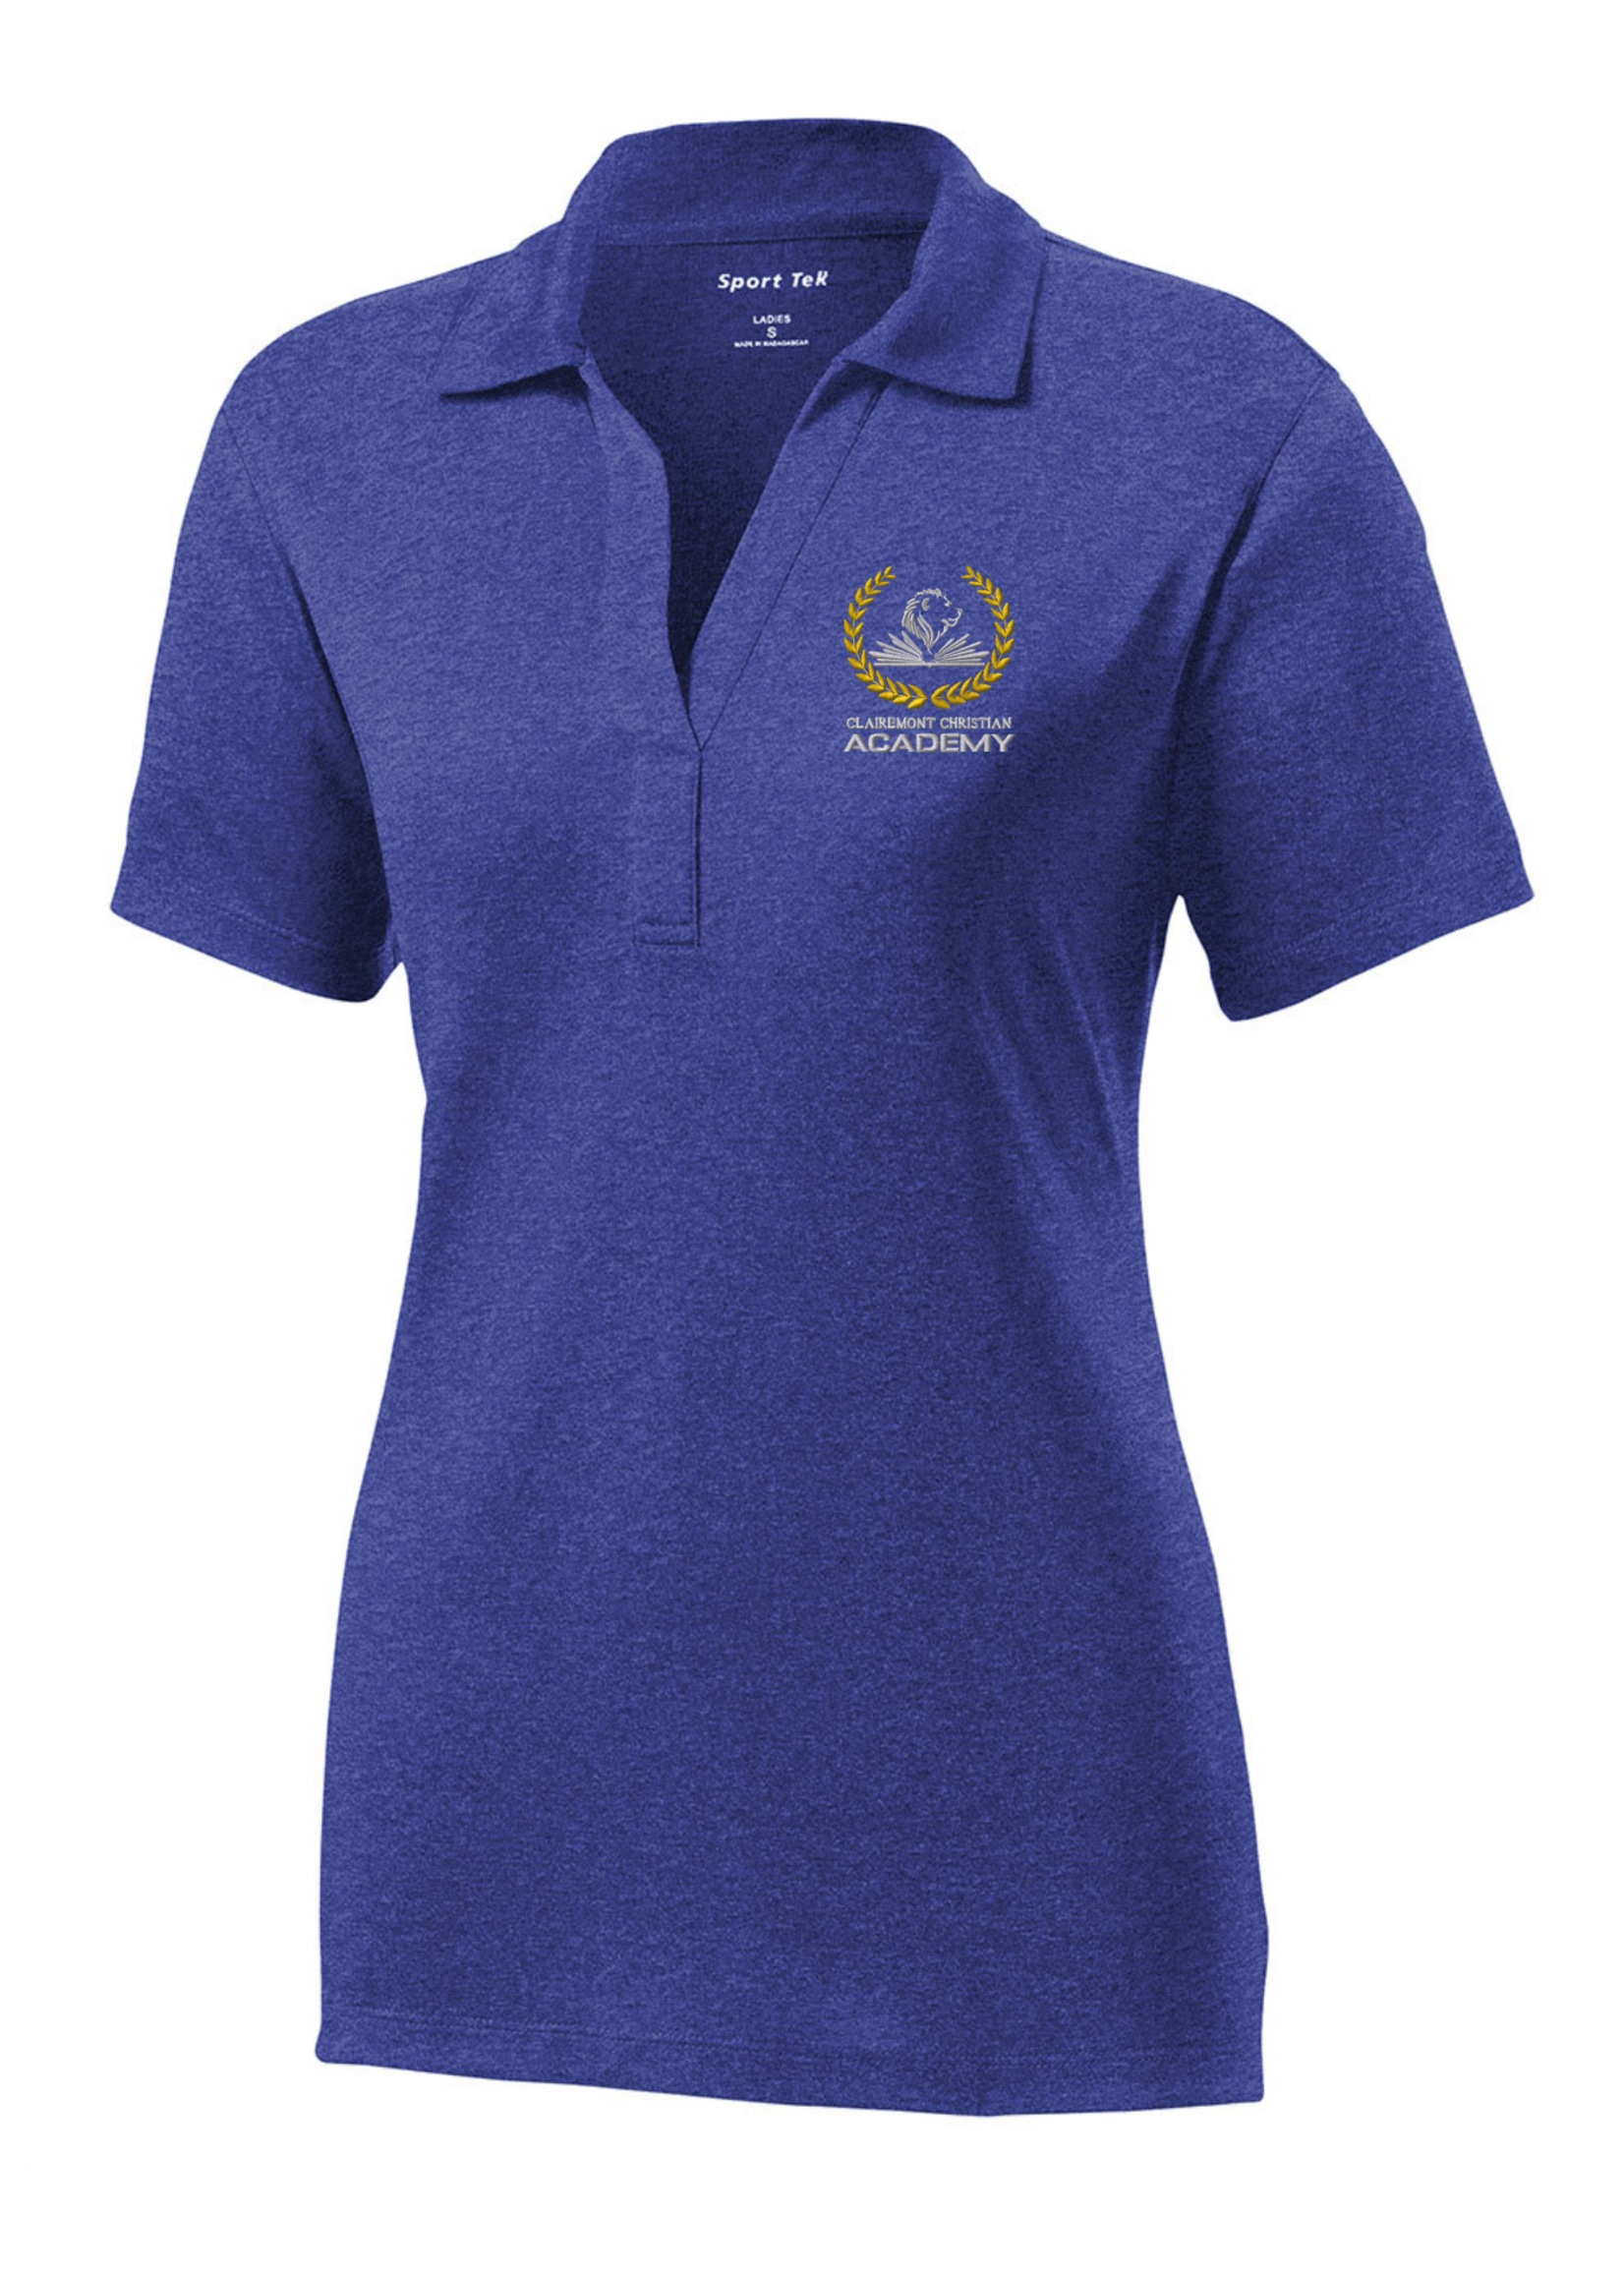 A+ Ladies Short Sleeve Performance Polo  Moisture-wicking, snag-resistant polo. Lightweight and breathable.  3.8-ounce, 100% polyester jersey Tag-free label Self-fabric collar Taped neck 3-button placket with dyed-to-match buttons Set-in, open hem sleeves Si